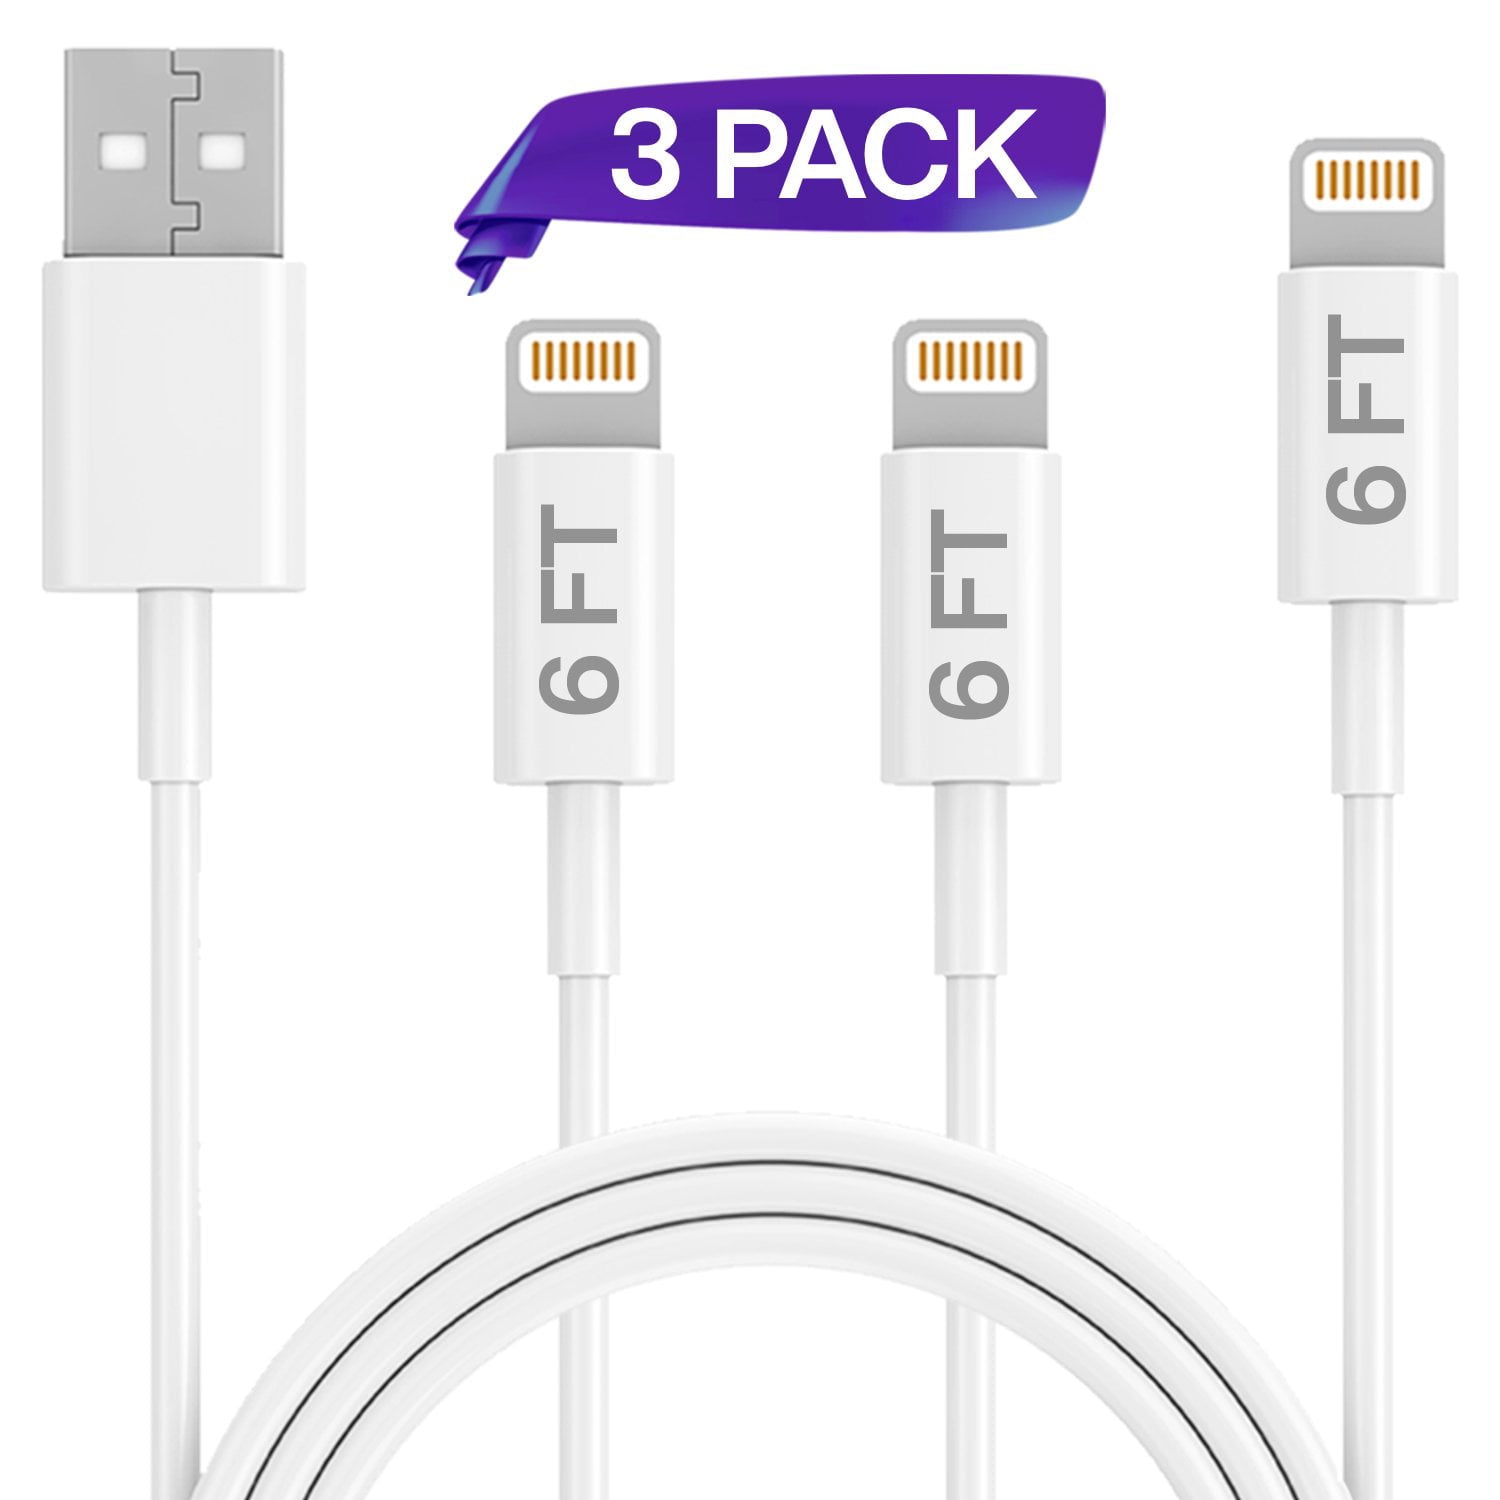 Violet Sturdy and Durable Flexible White Charging Cable for Aple Compatible Devices 6 Ft., 3 Pcs Set